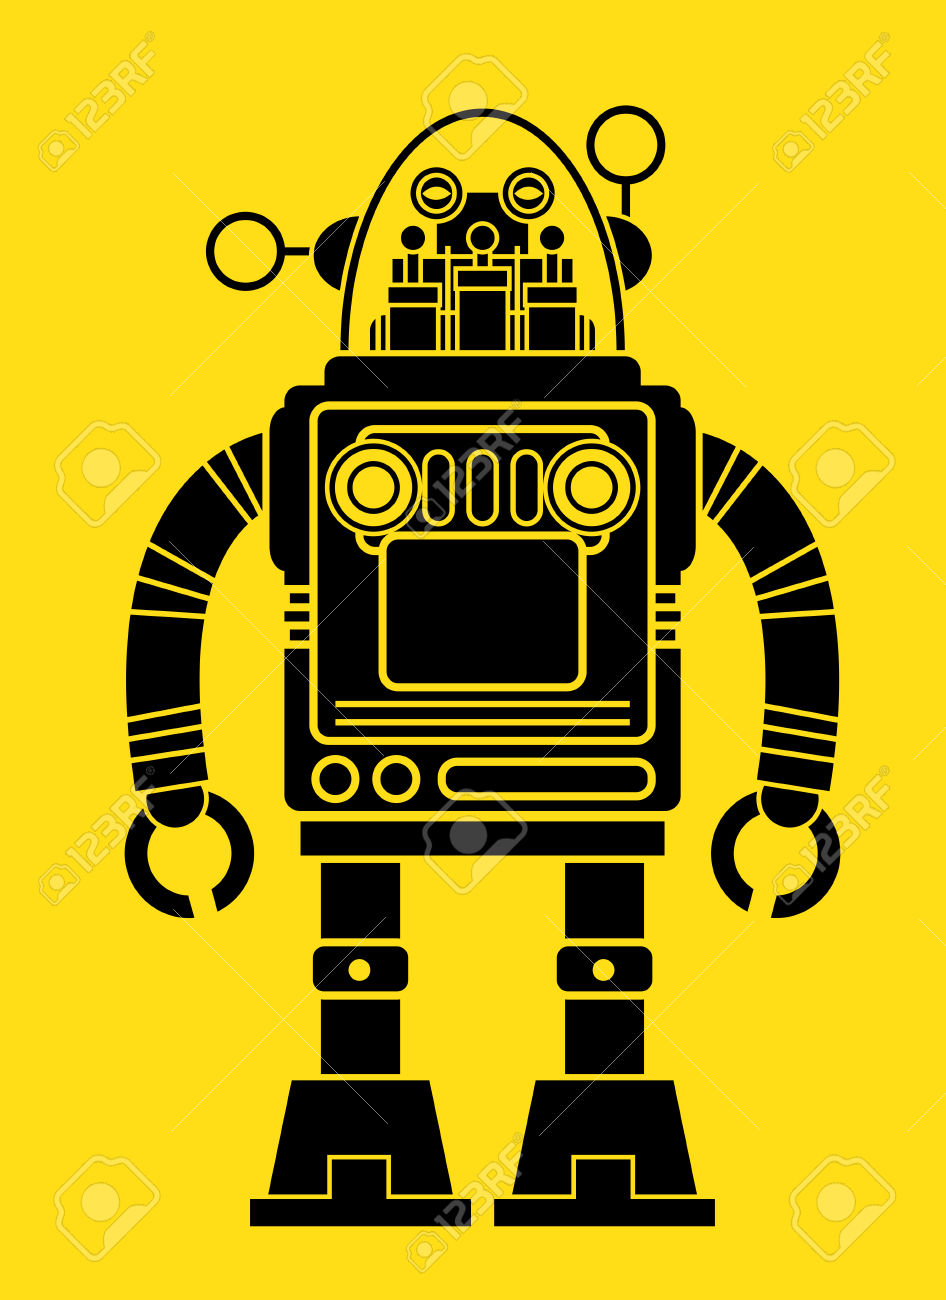 Retro Tin Toy Robot Silhouette Royalty Free Cliparts, Vectors, And.